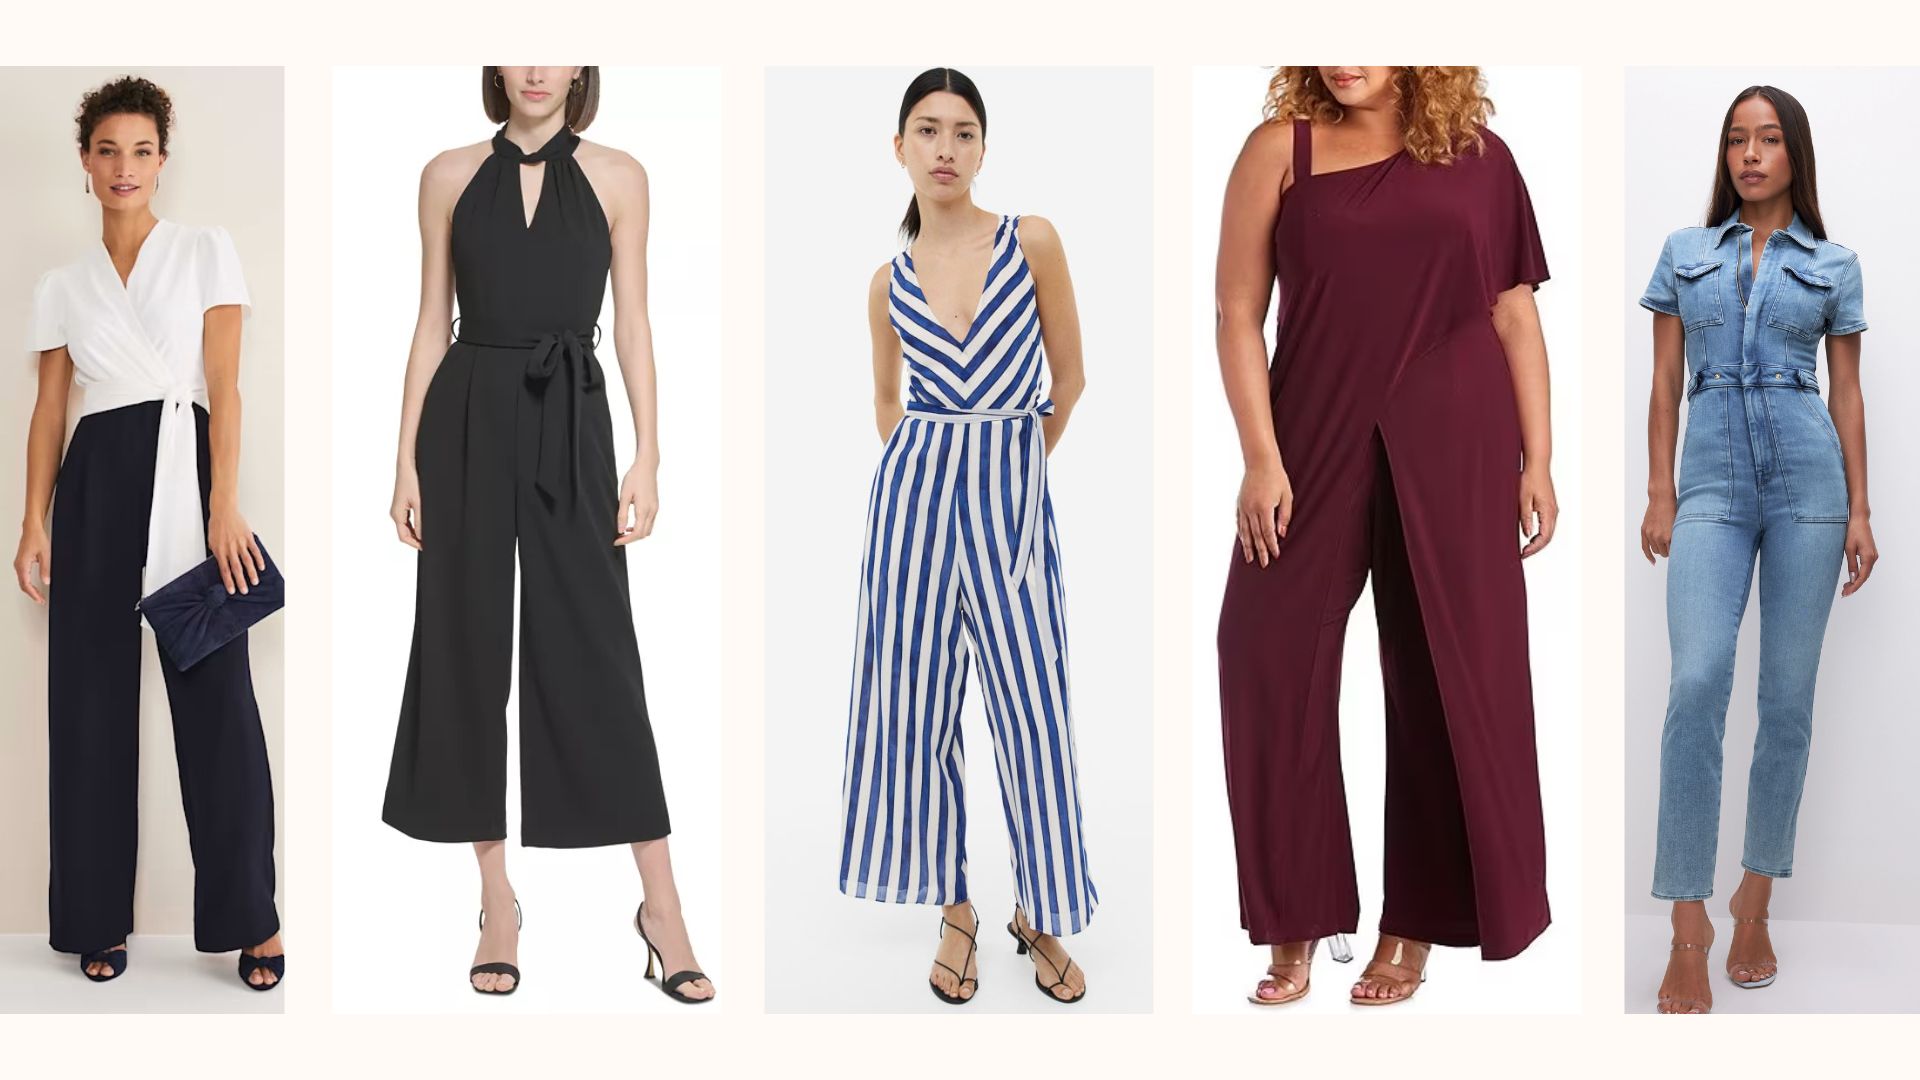 Details 55+ are jumpsuits flattering latest